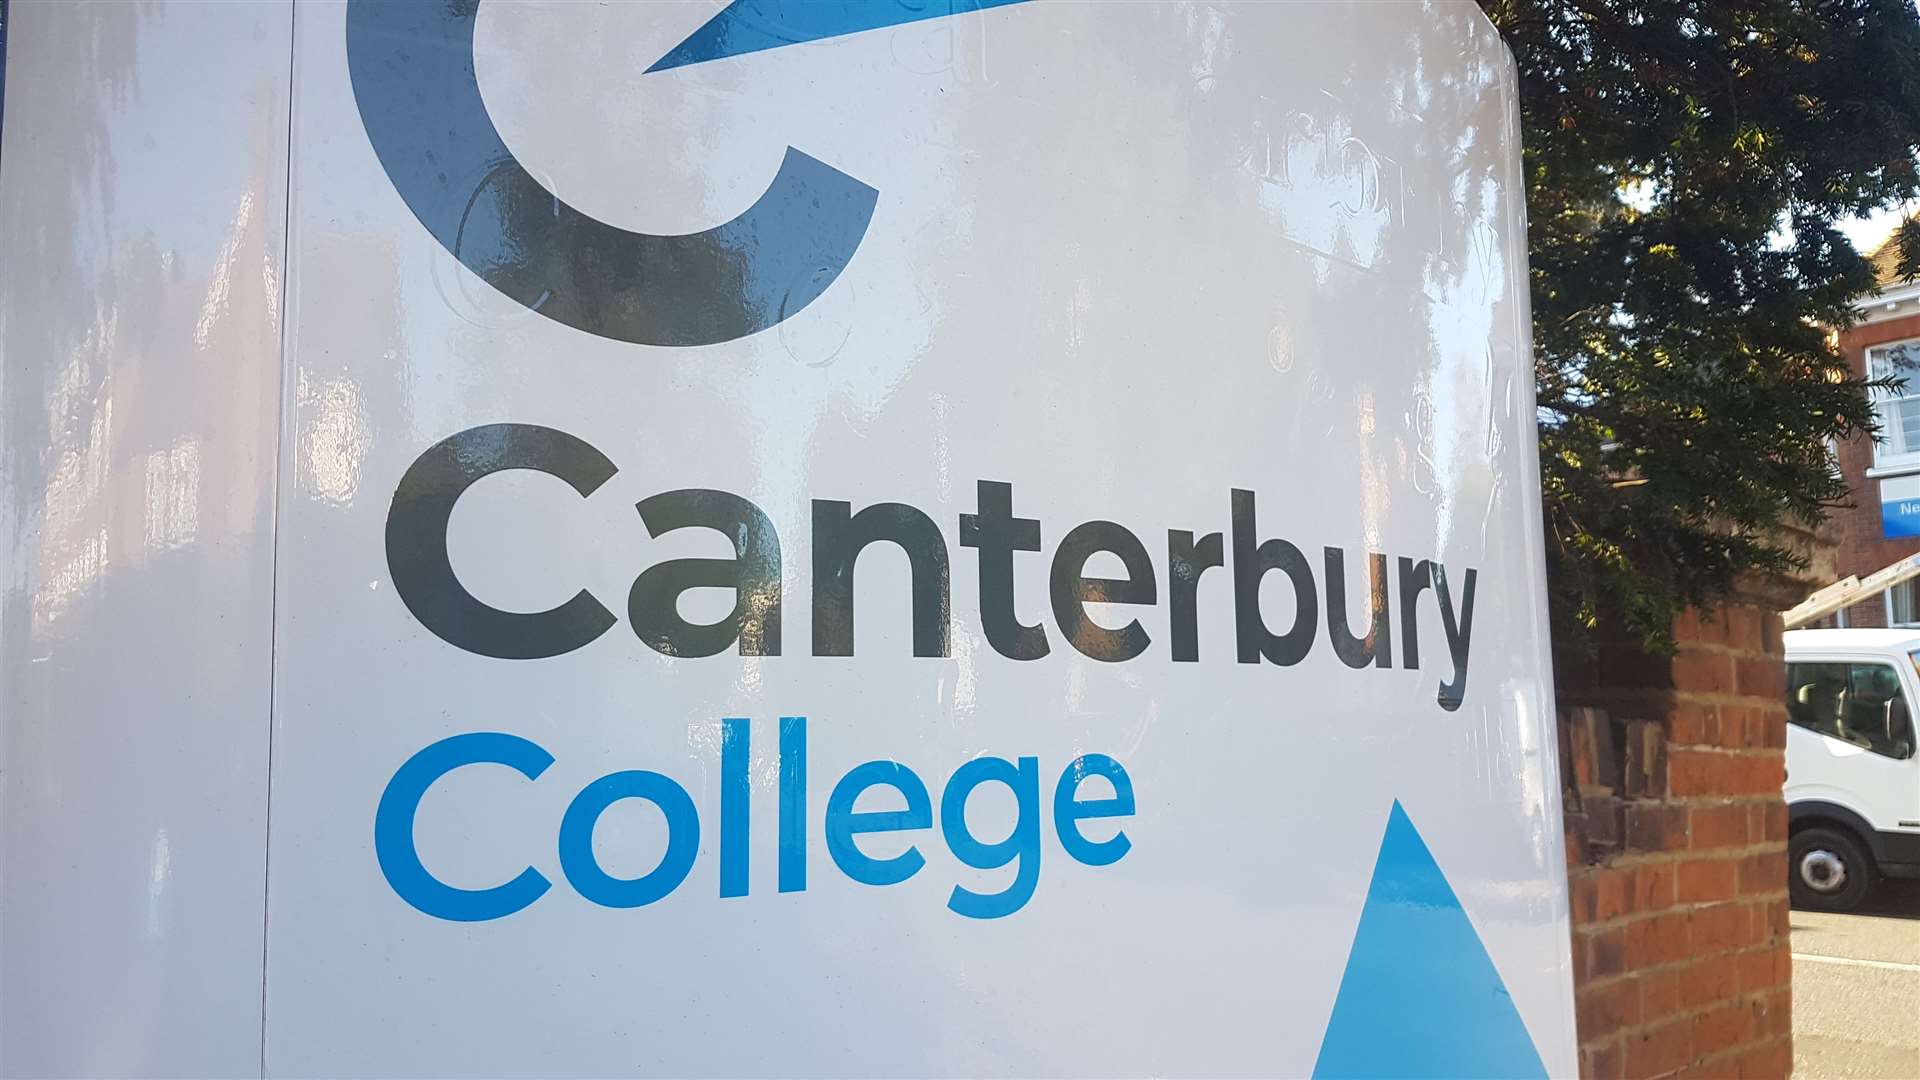 Canterbury College, part of the EKC Group, will help unite jobseekers with employers